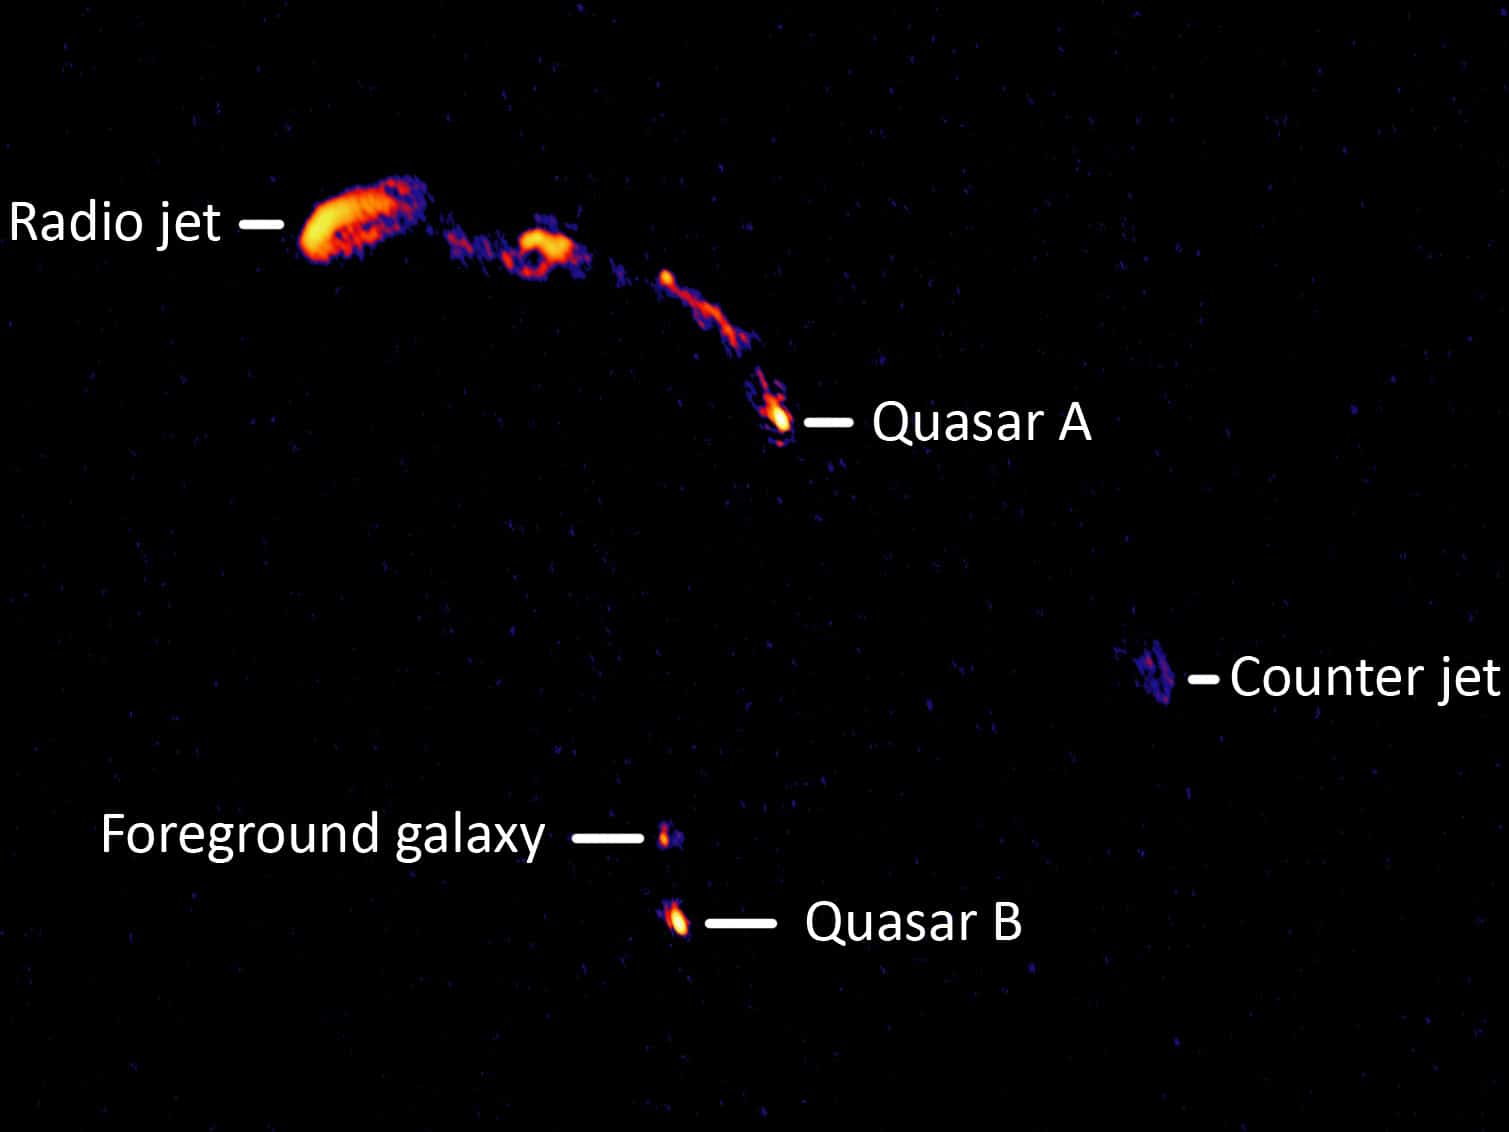 The gravitational collapse and the black hole spewing jets of matter. Photo: the e-Merlin radio telescope array